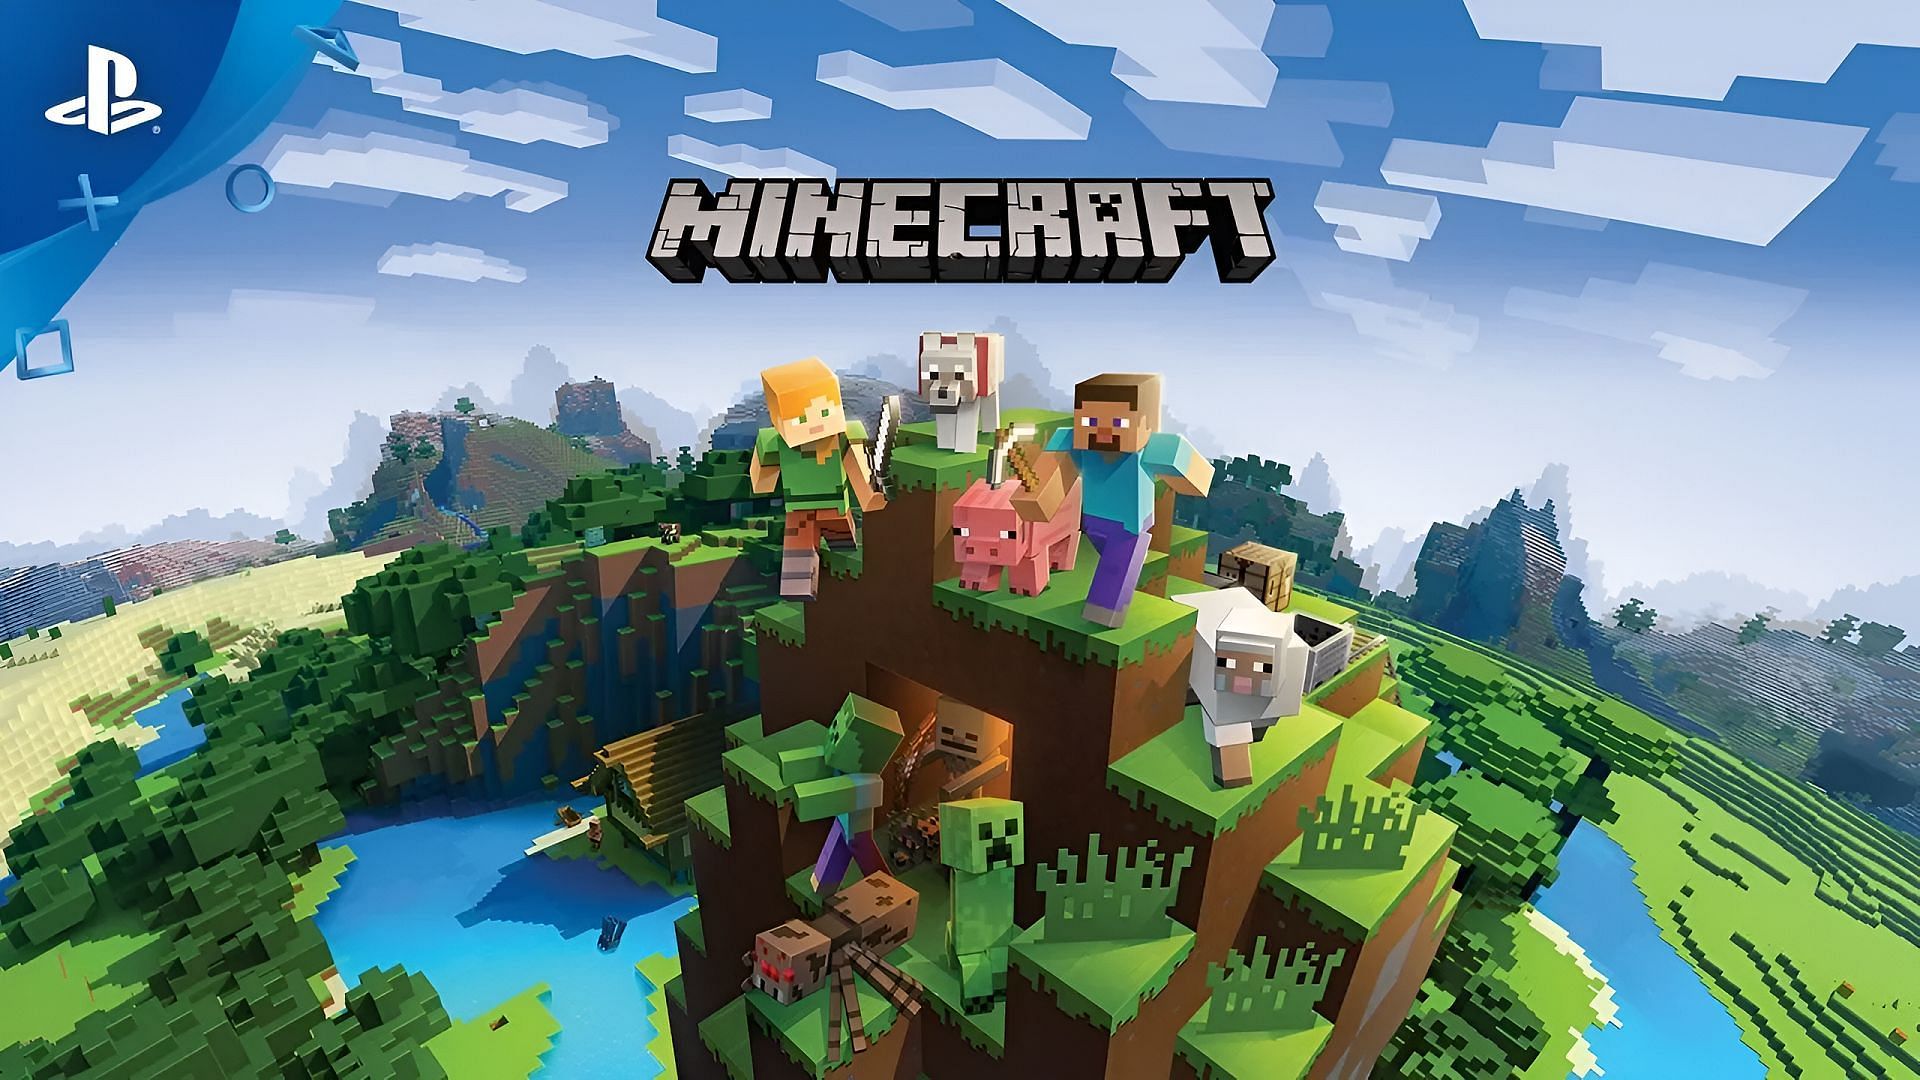 PlayStation players can update Minecraft in just a few seconds (Image via Mojang/Sony)